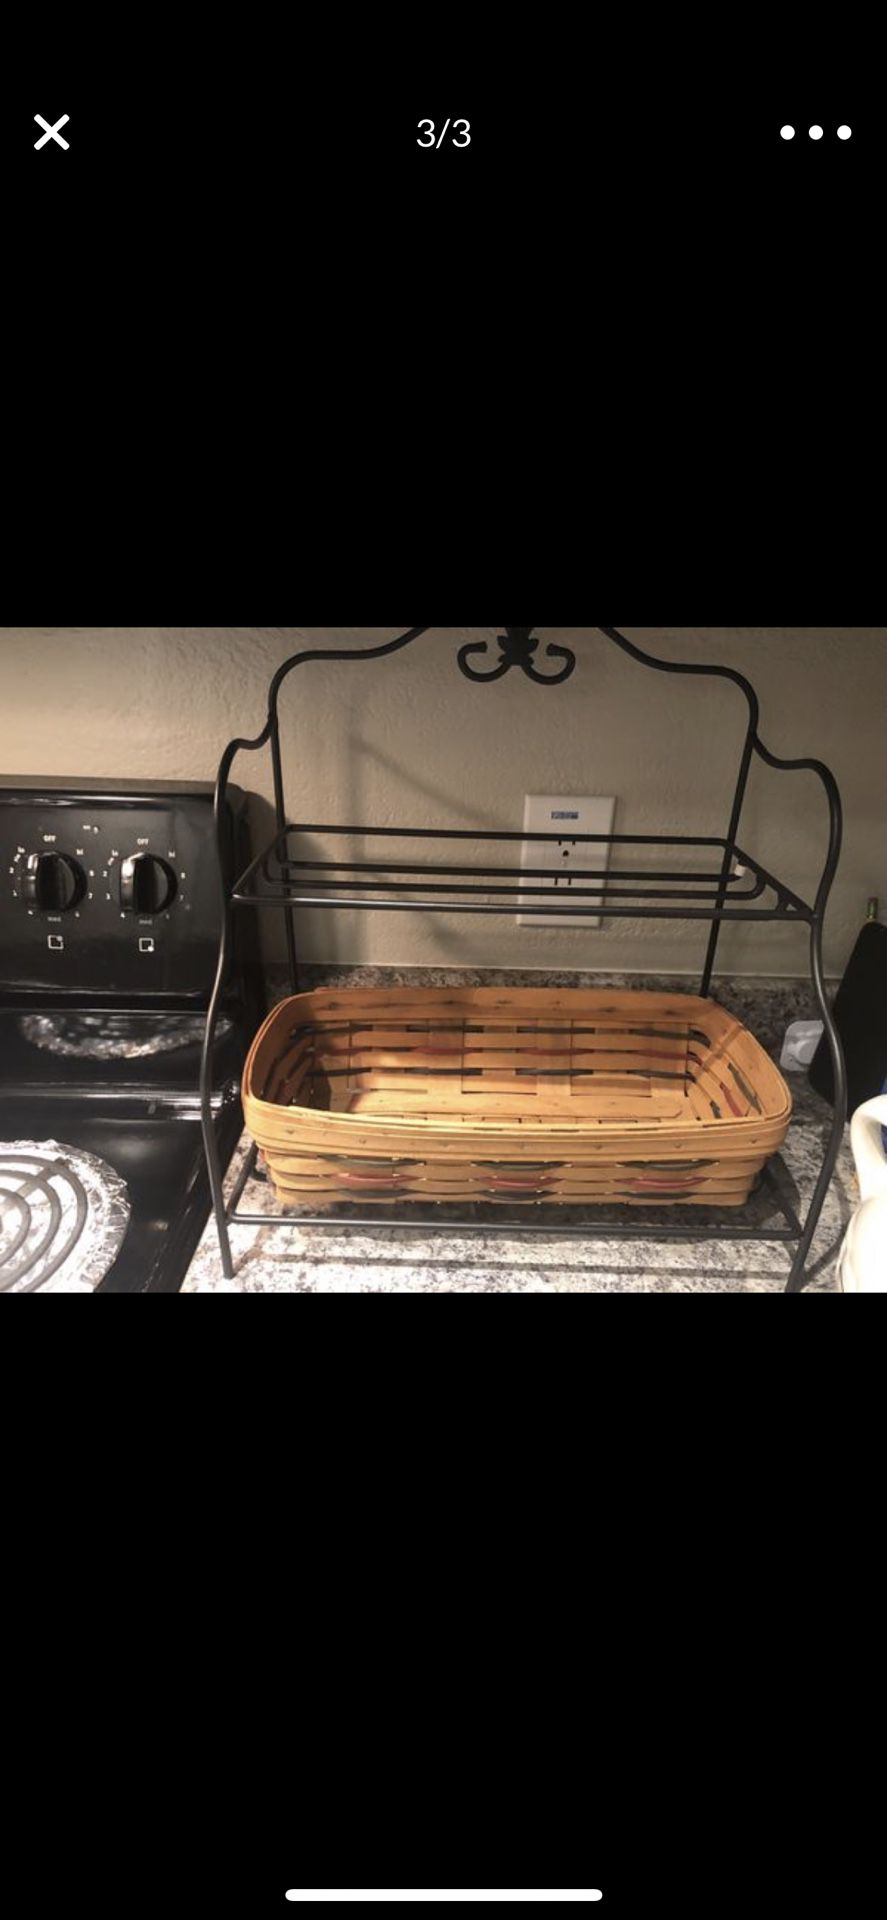 LONGABERGER SMALL COUNTER TOP BAKERS RACK W/ BREAD BASKET